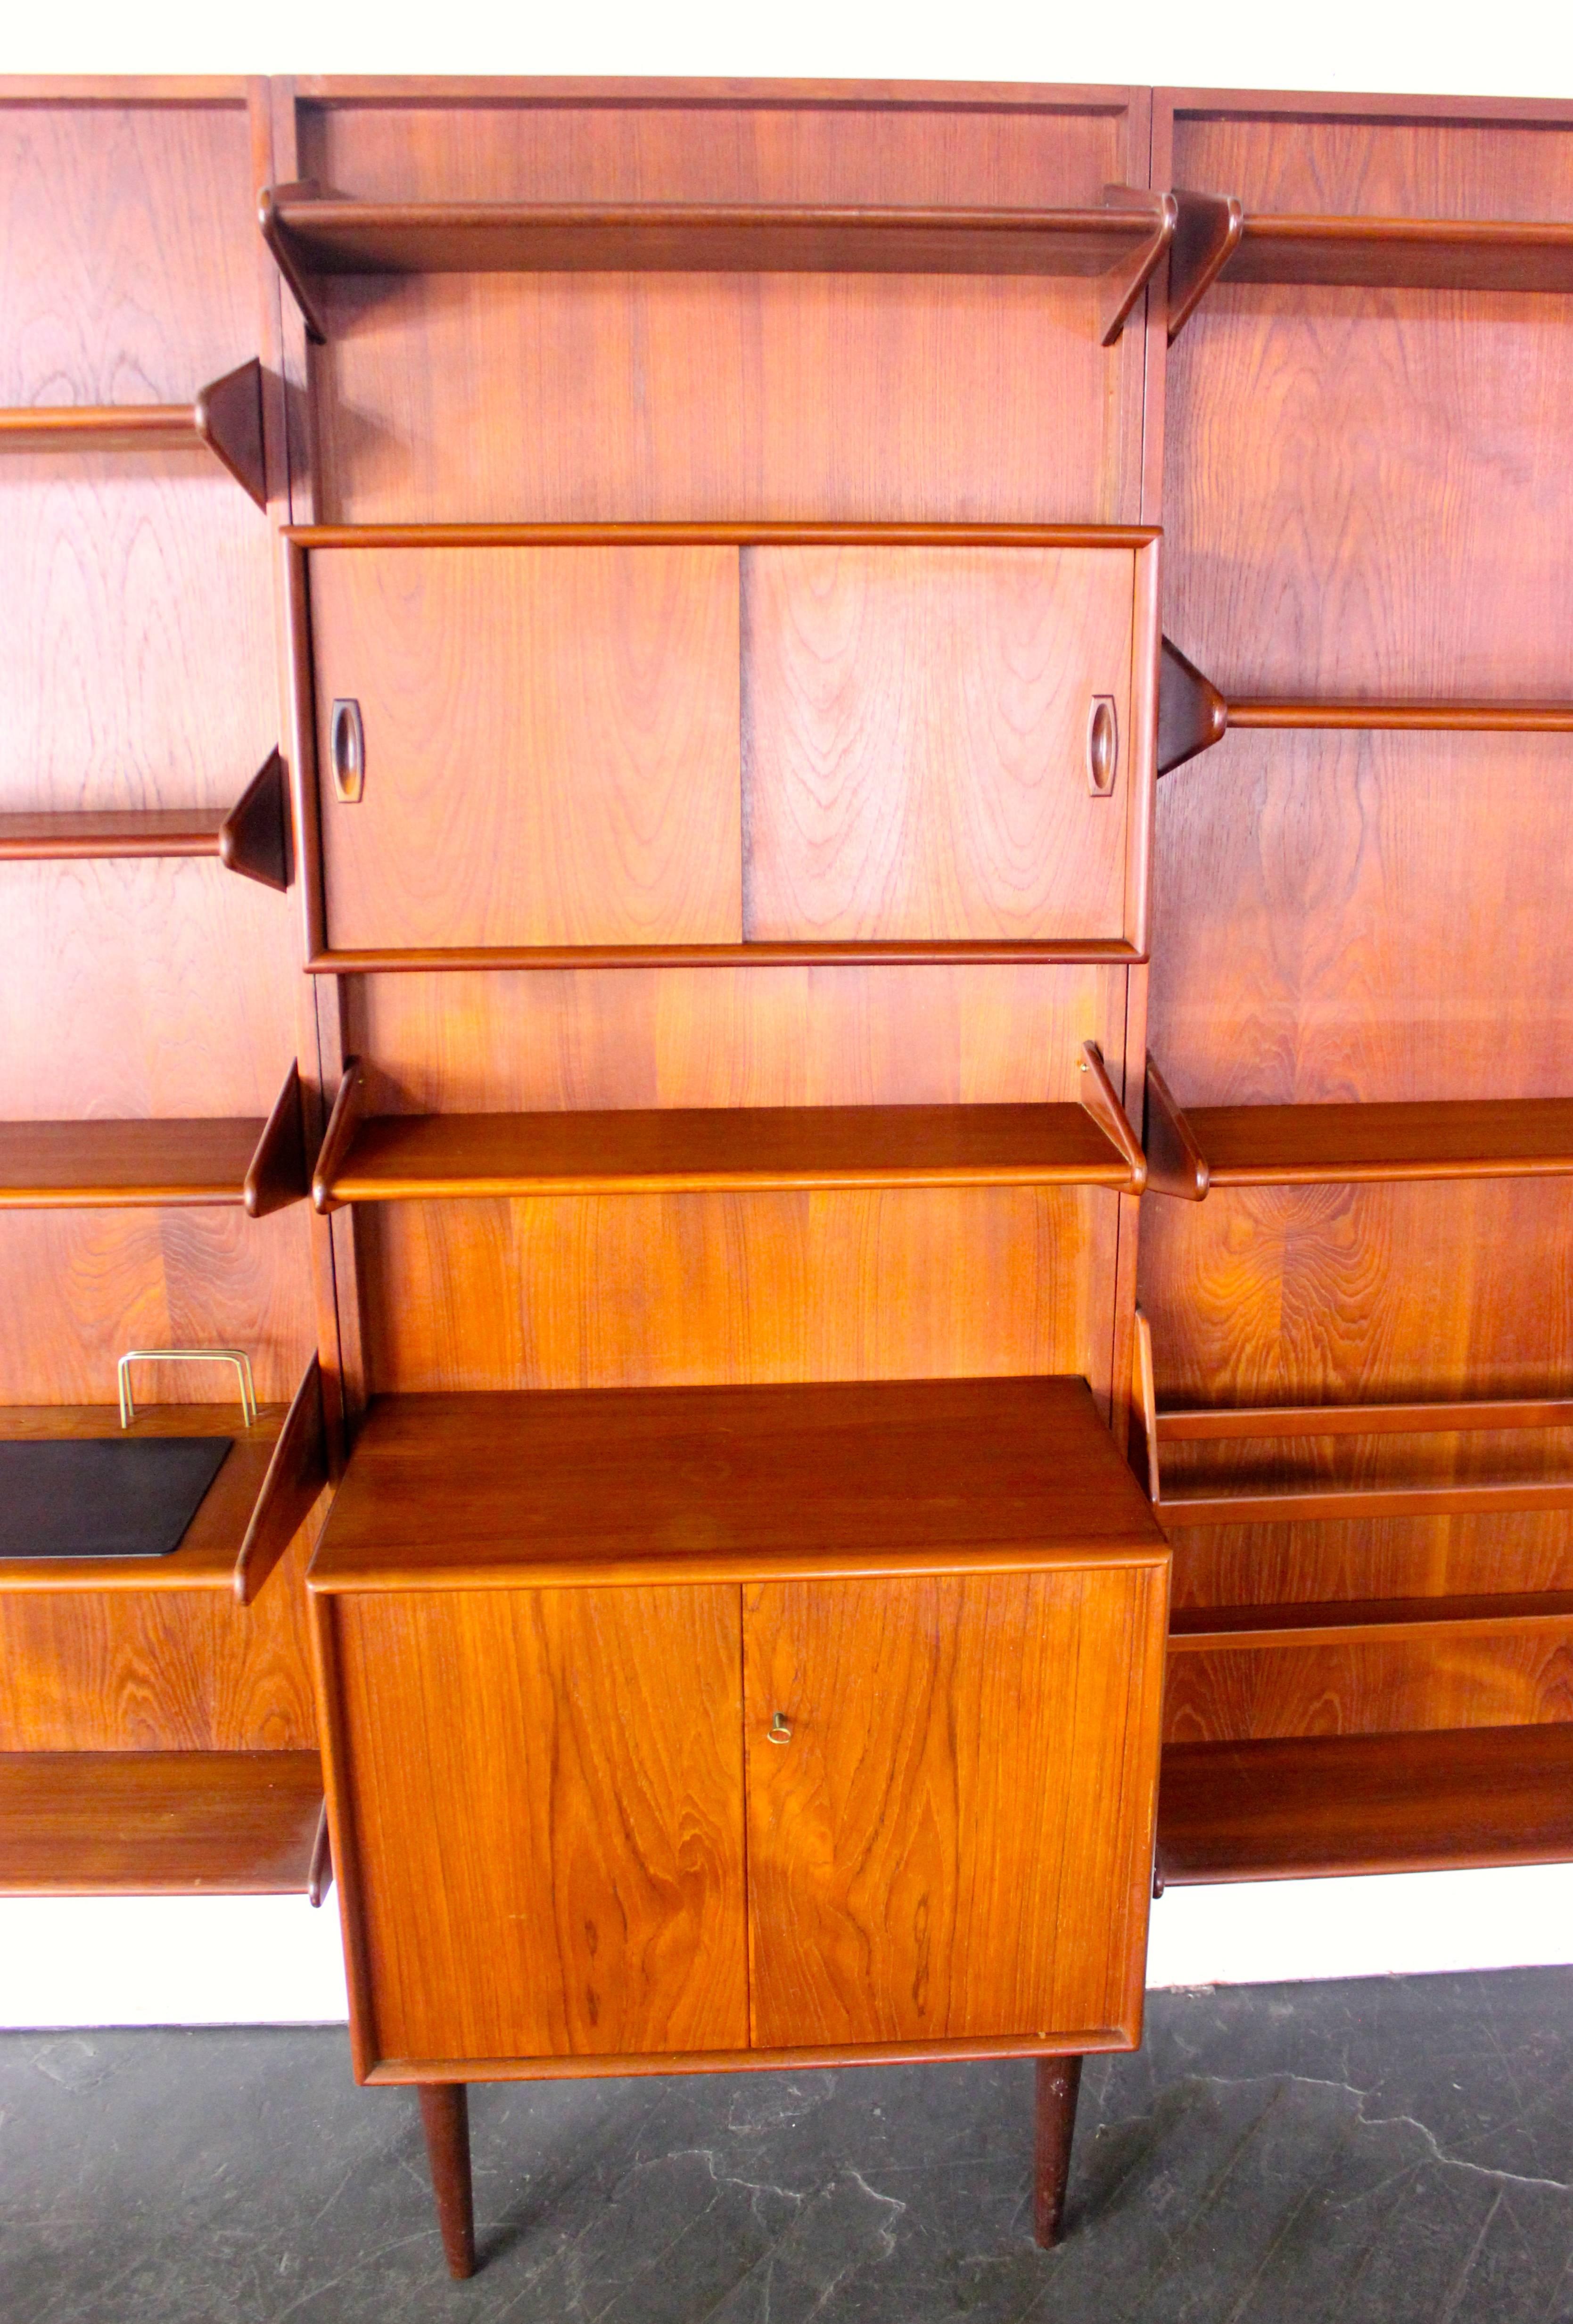 Expansive Danish Modern Teak Wall-Mounted Unit Designed by Arne Hovmand Olsen In Excellent Condition For Sale In Portland, OR